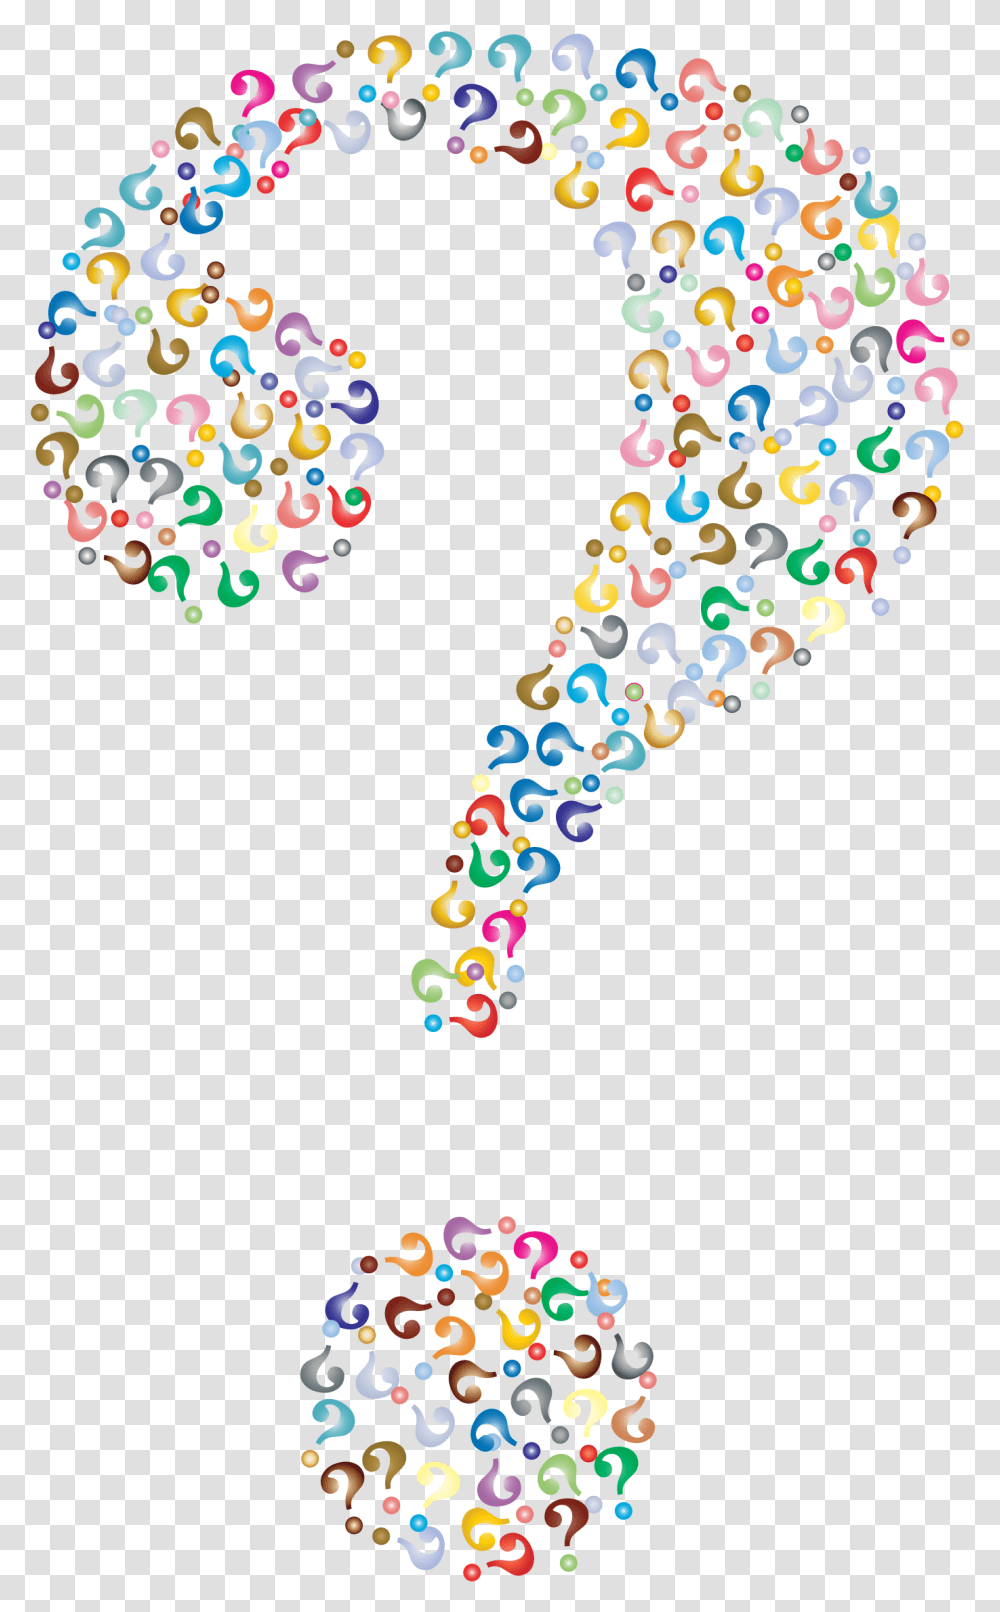 Unknown Clipart Any Question Question Marks No Background Background Question Mark Emoji, Paper, Confetti, Graphics, Text Transparent Png